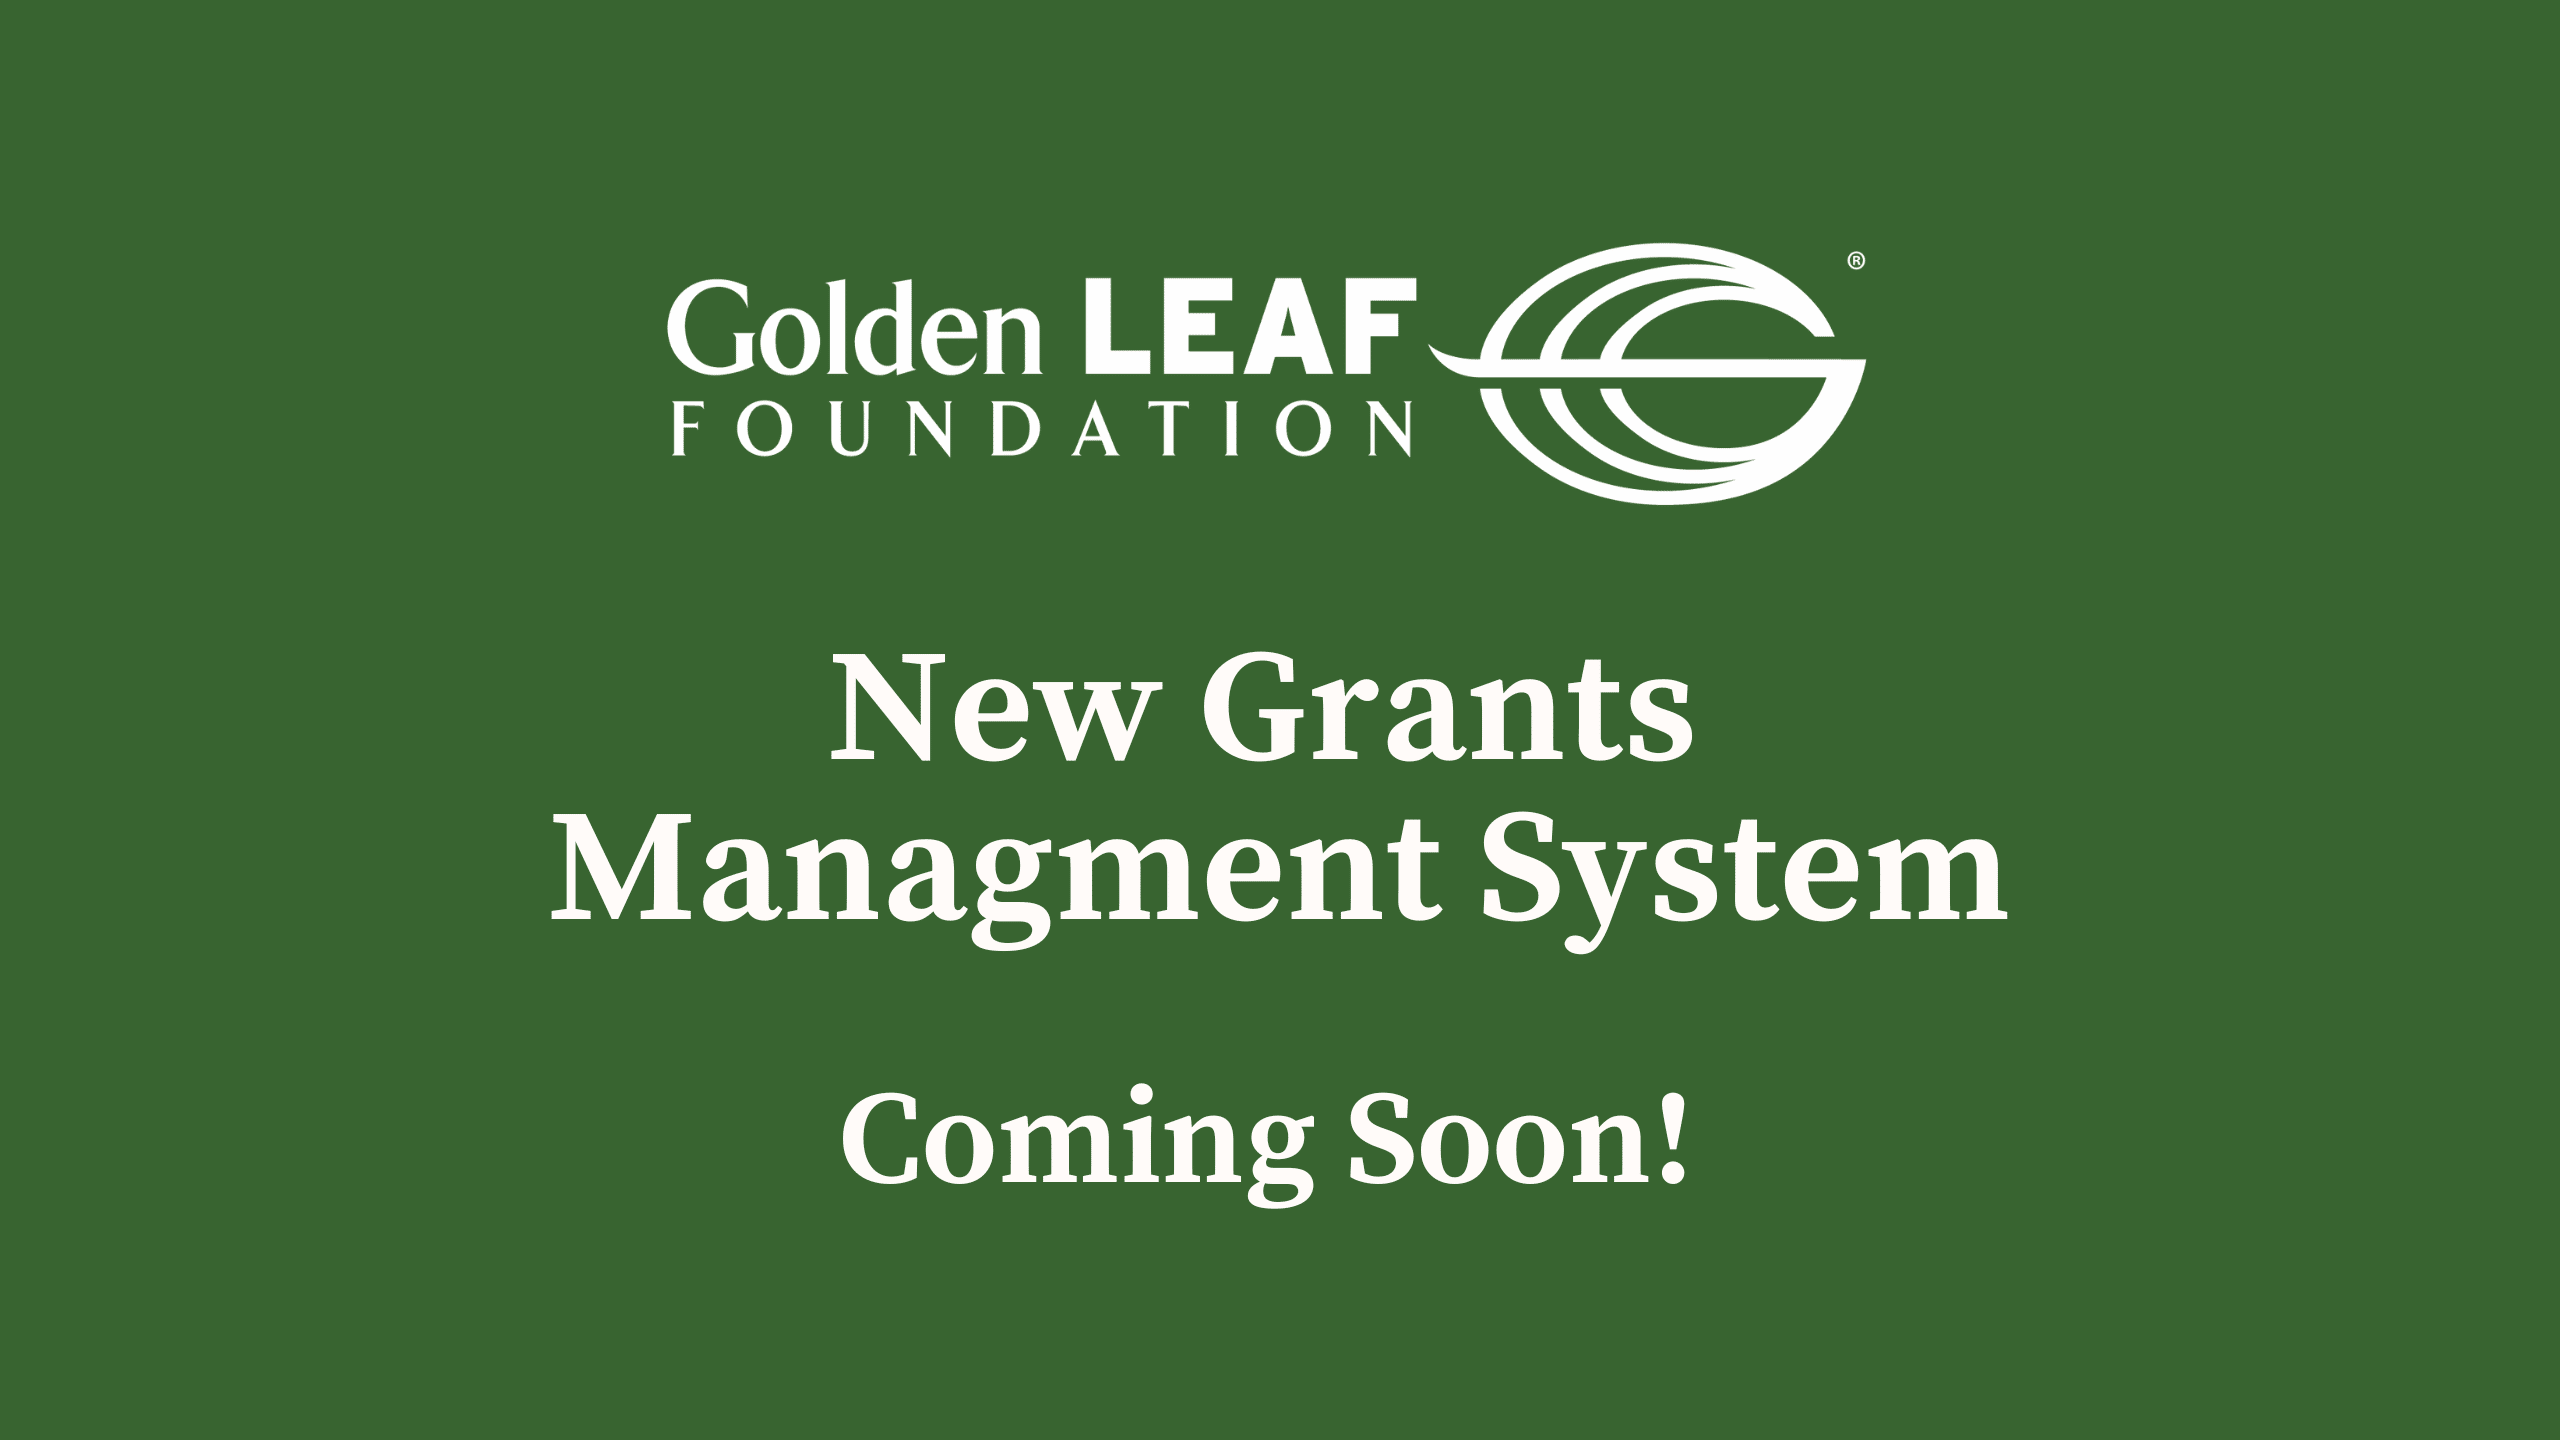 Announcement: New grants management system coming soon